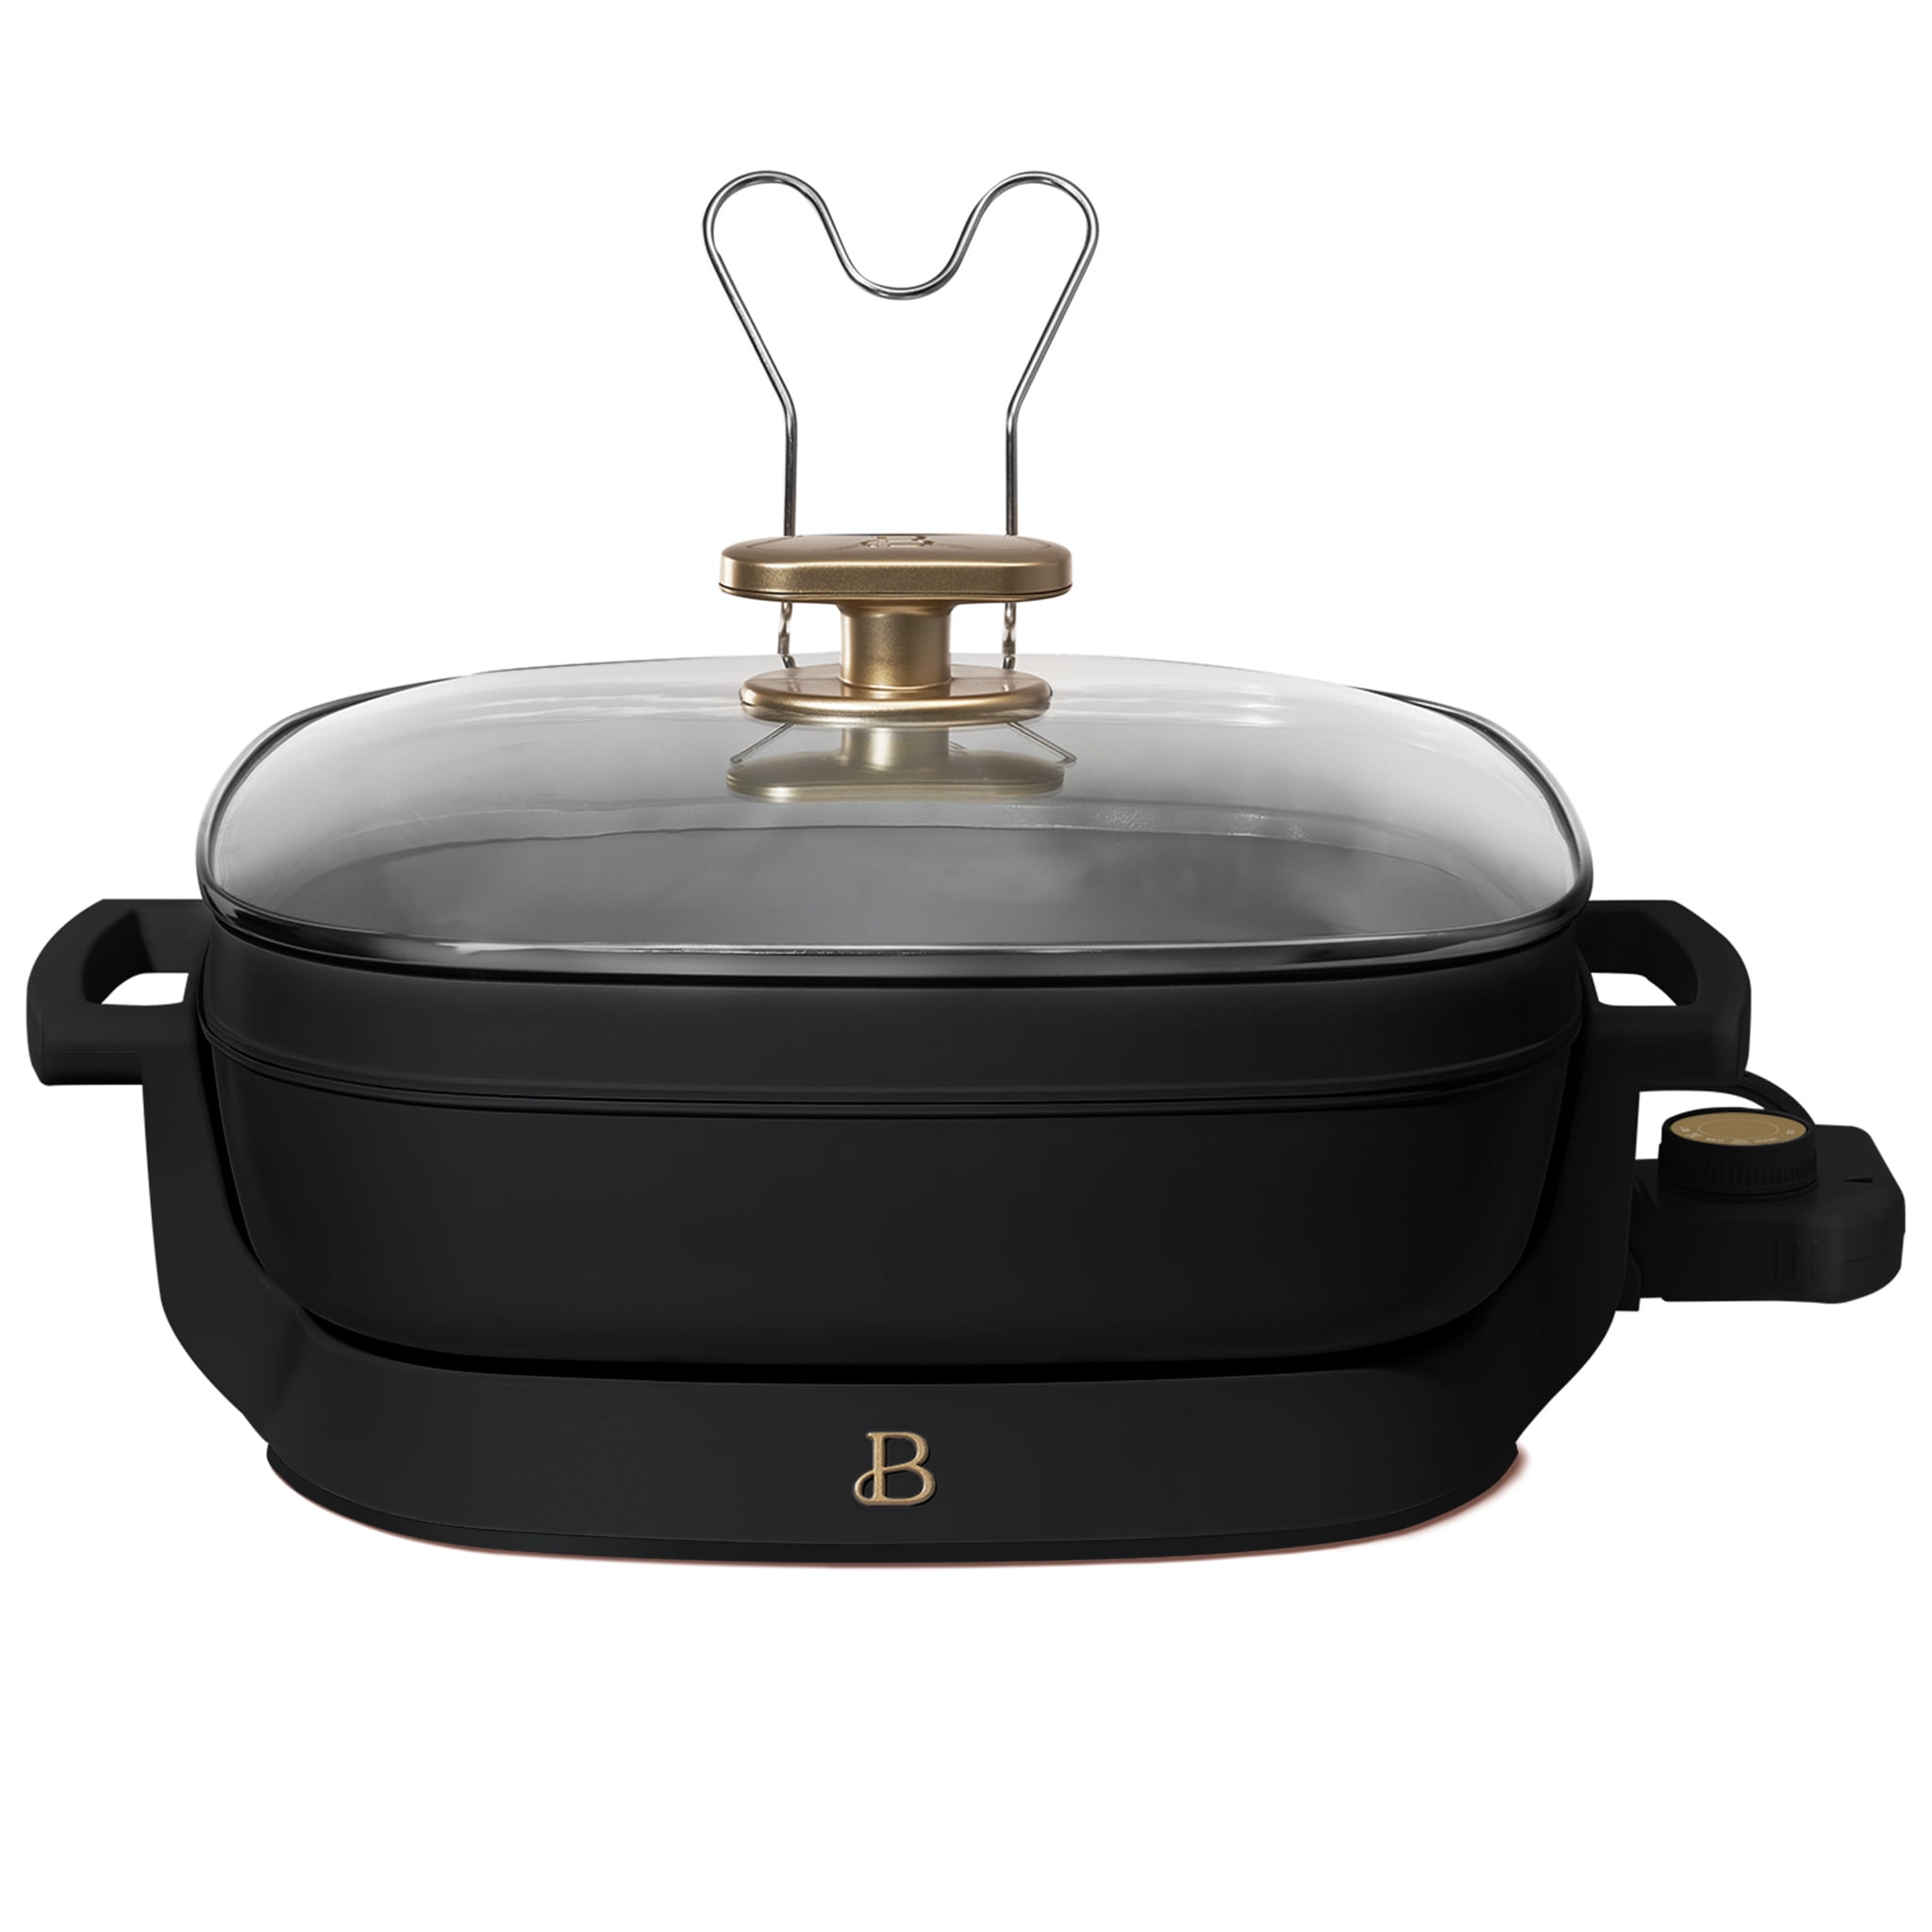 Drew Barrymore's best-selling 5-in-1 expandable electric skillet is on sale  for less than $50 at Walmart